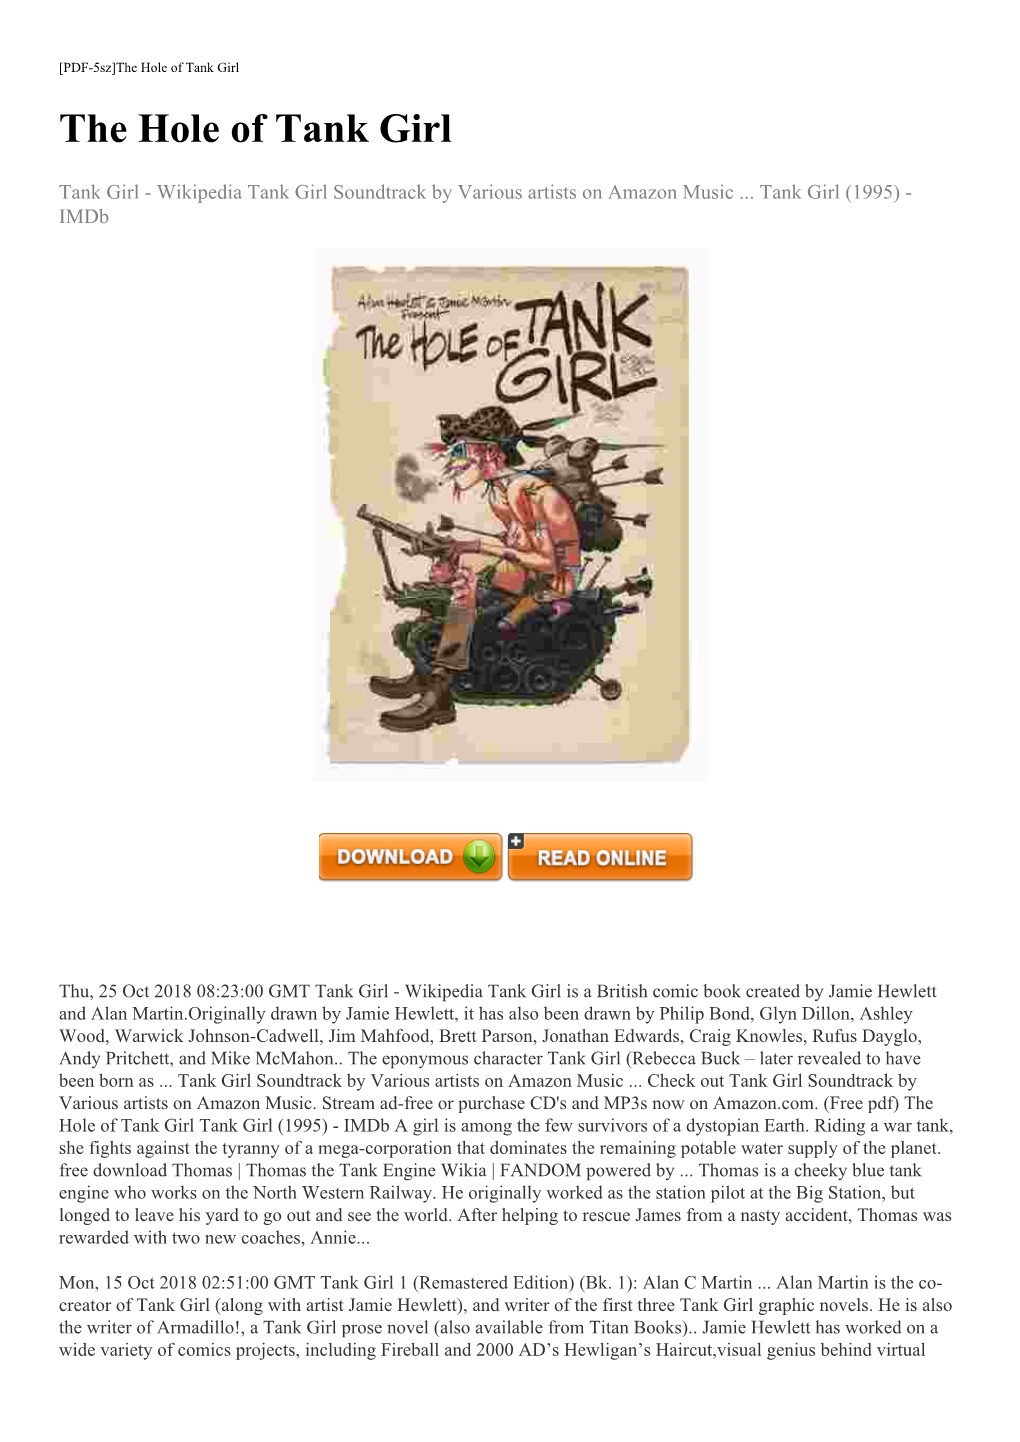 (Free Pdf) the Hole of Tank Girl Tank Girl (1995) - Imdb a Girl Is Among the Few Survivors of a Dystopian Earth